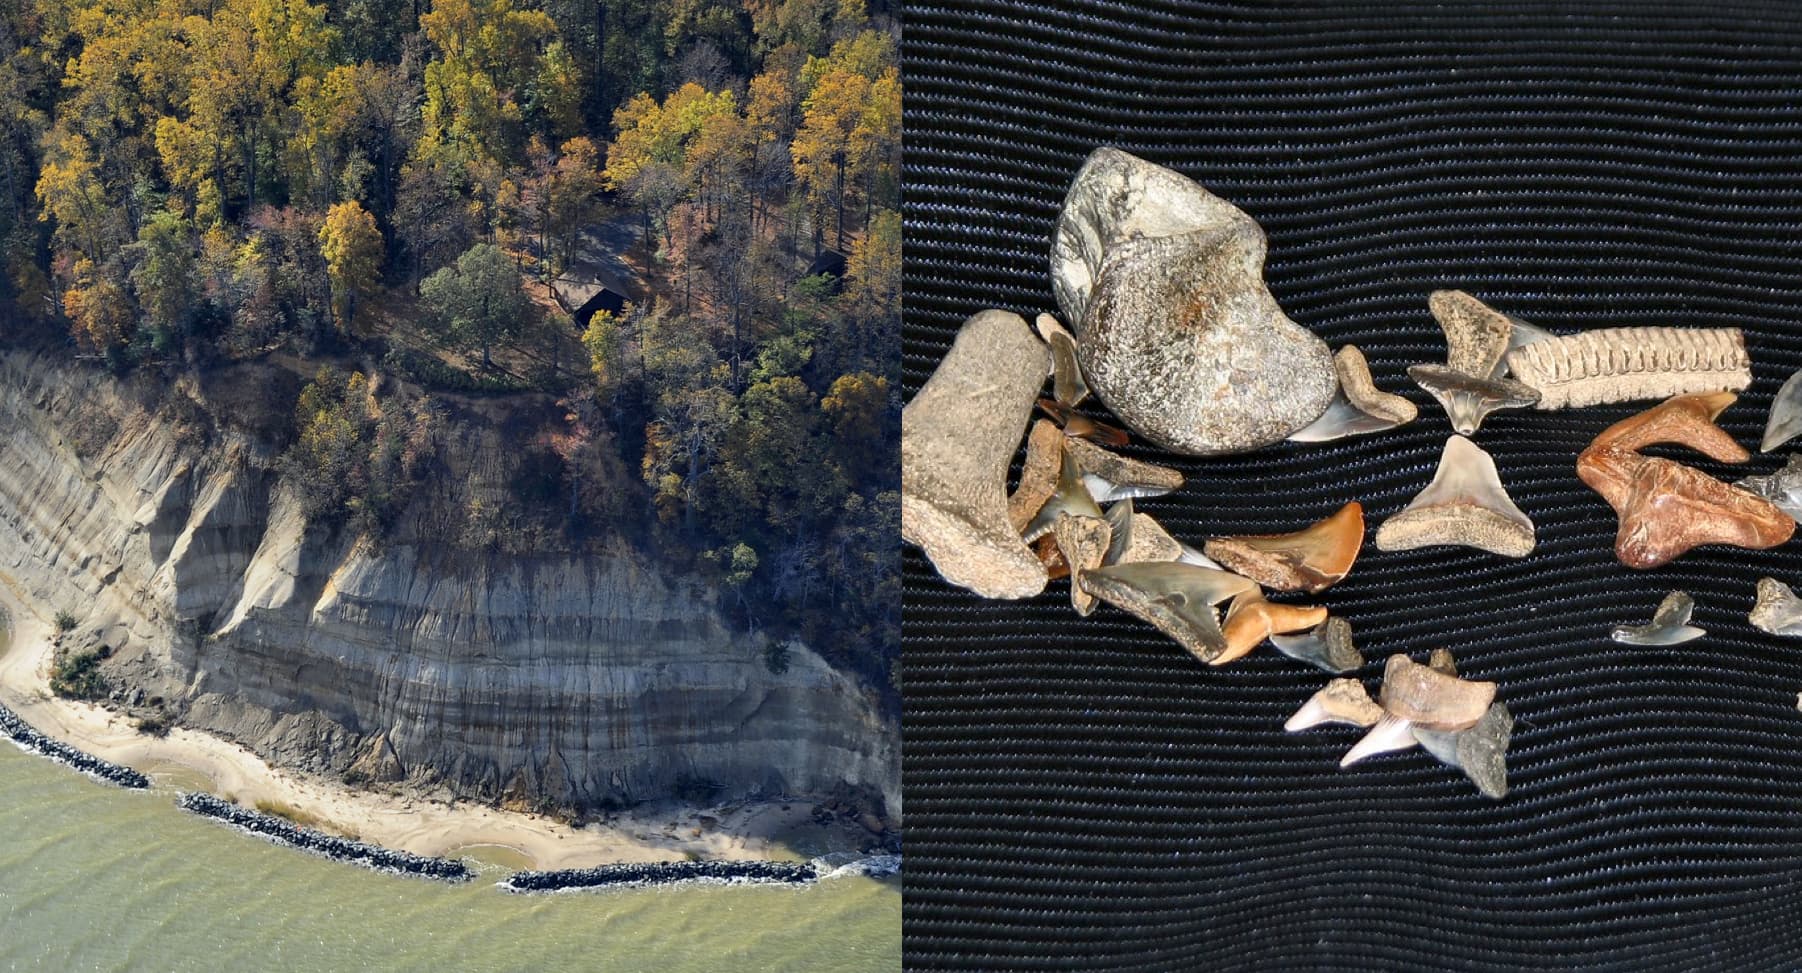 a cliff near the shore of a river next to a table holding shark teeth fossilized